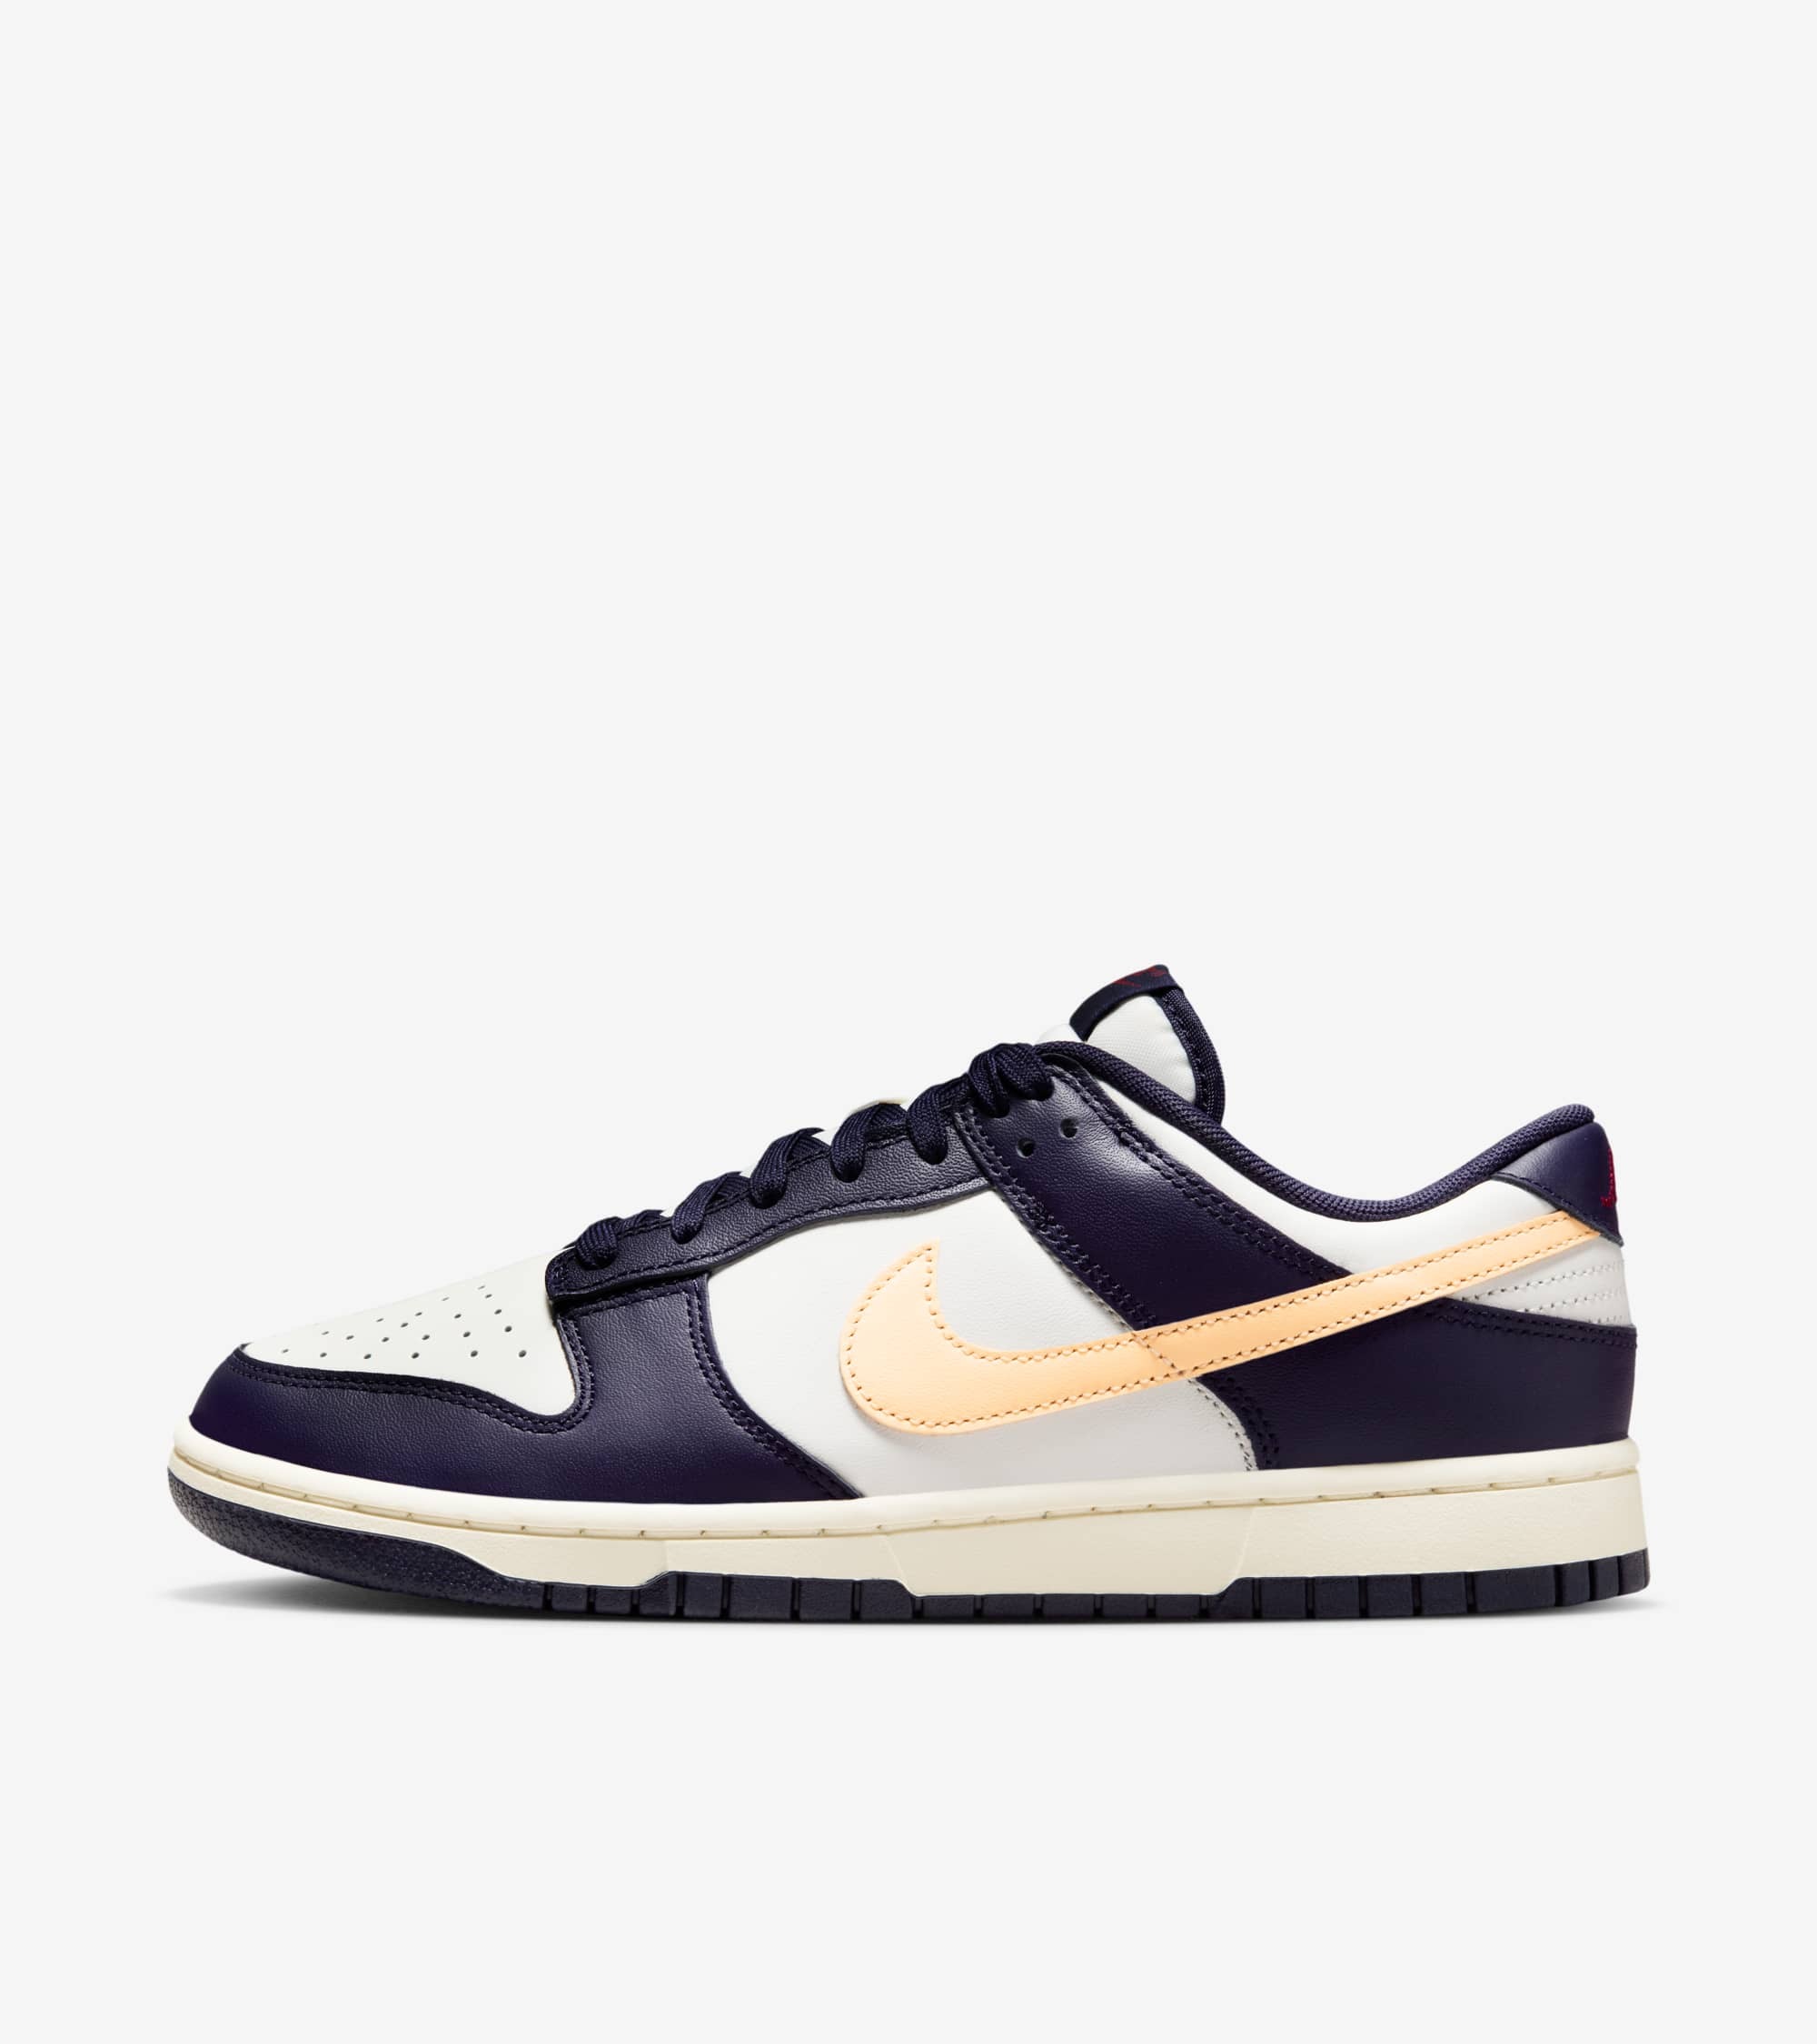 Nike Dunk Low Retro "From Nike To You Midnight Navy", Größe: 48,5